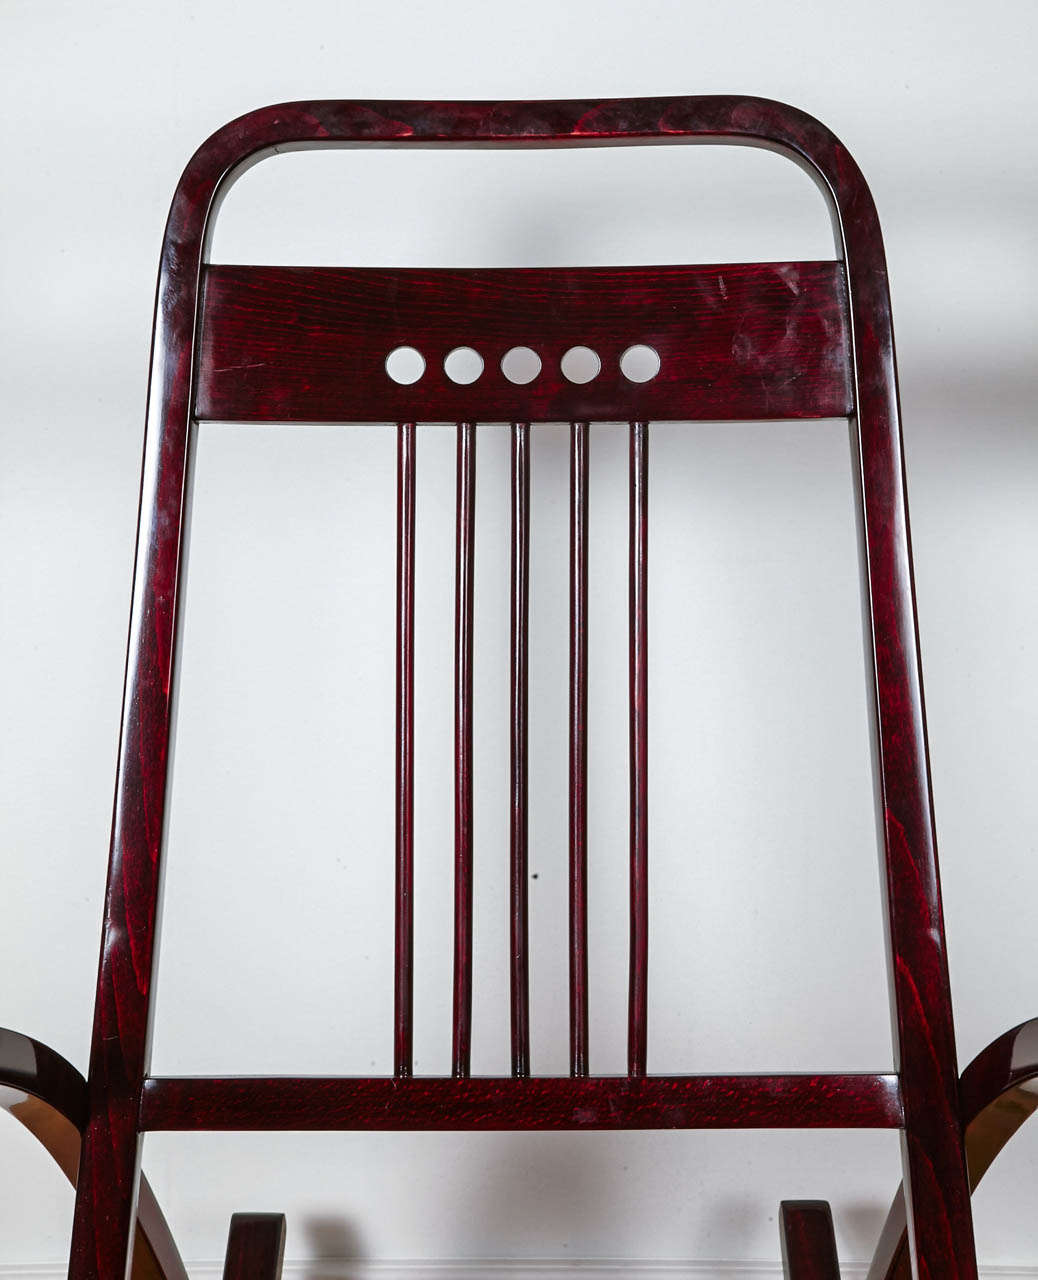 Vienna Secession Viennese Secession Rocking Chair by Thonet, circa 1911